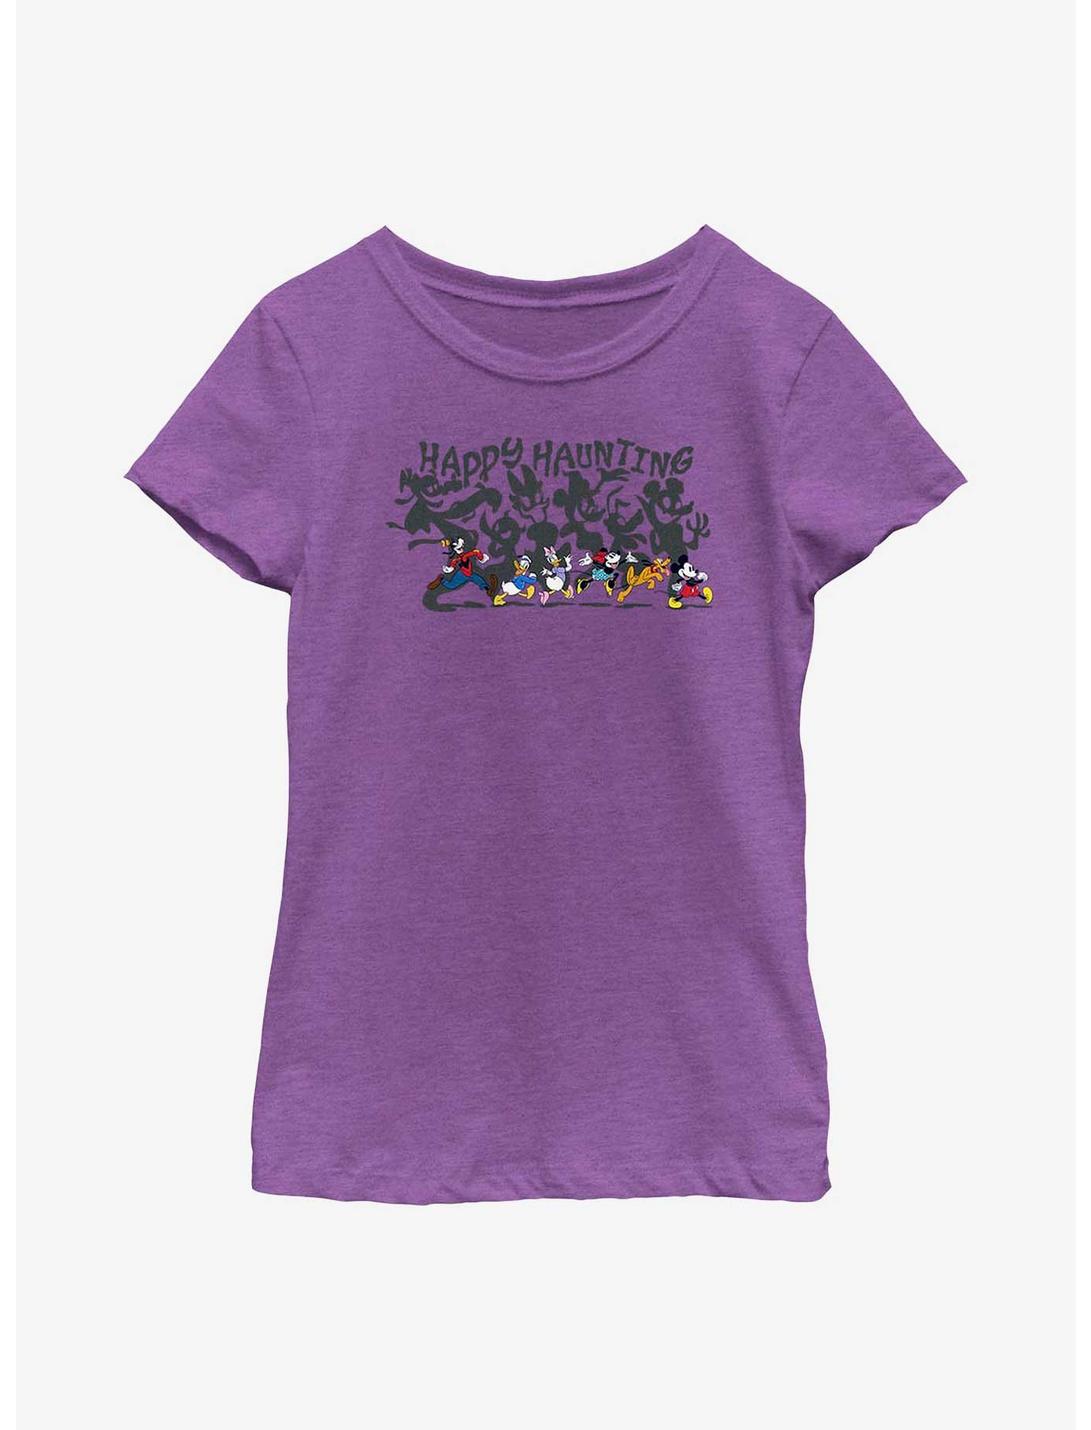 Disney Mickey Mouse & Friends Happy Haunting Shadows Youth Girls T-Shirt, PURPLE BERRY, hi-res